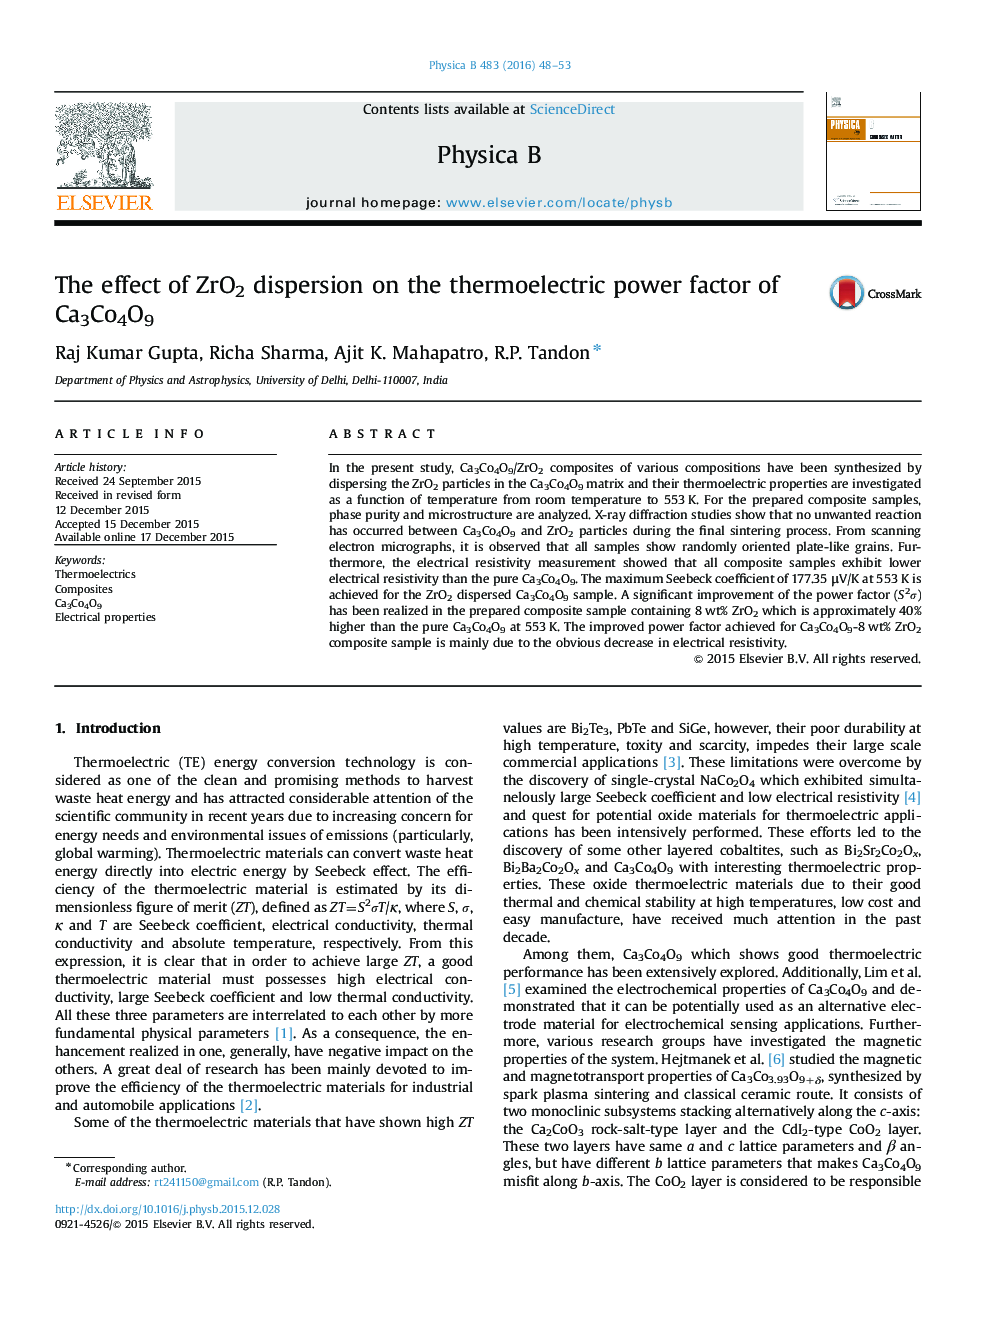 The effect of ZrO2 dispersion on the thermoelectric power factor of Ca3Co4O9